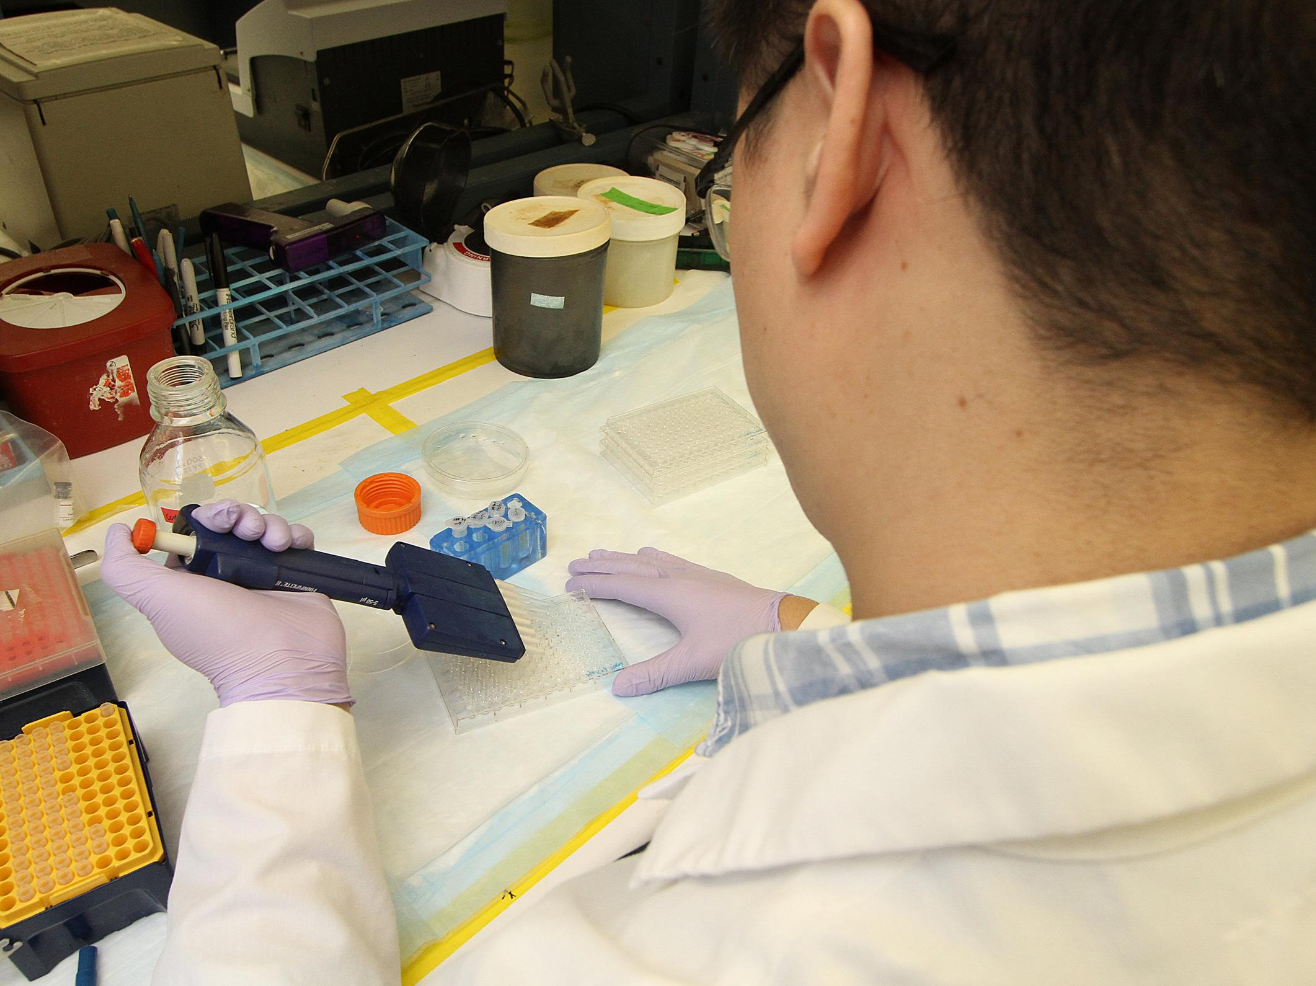 A New York Blood Center Enterprises researcher filling a tray during an experiment.